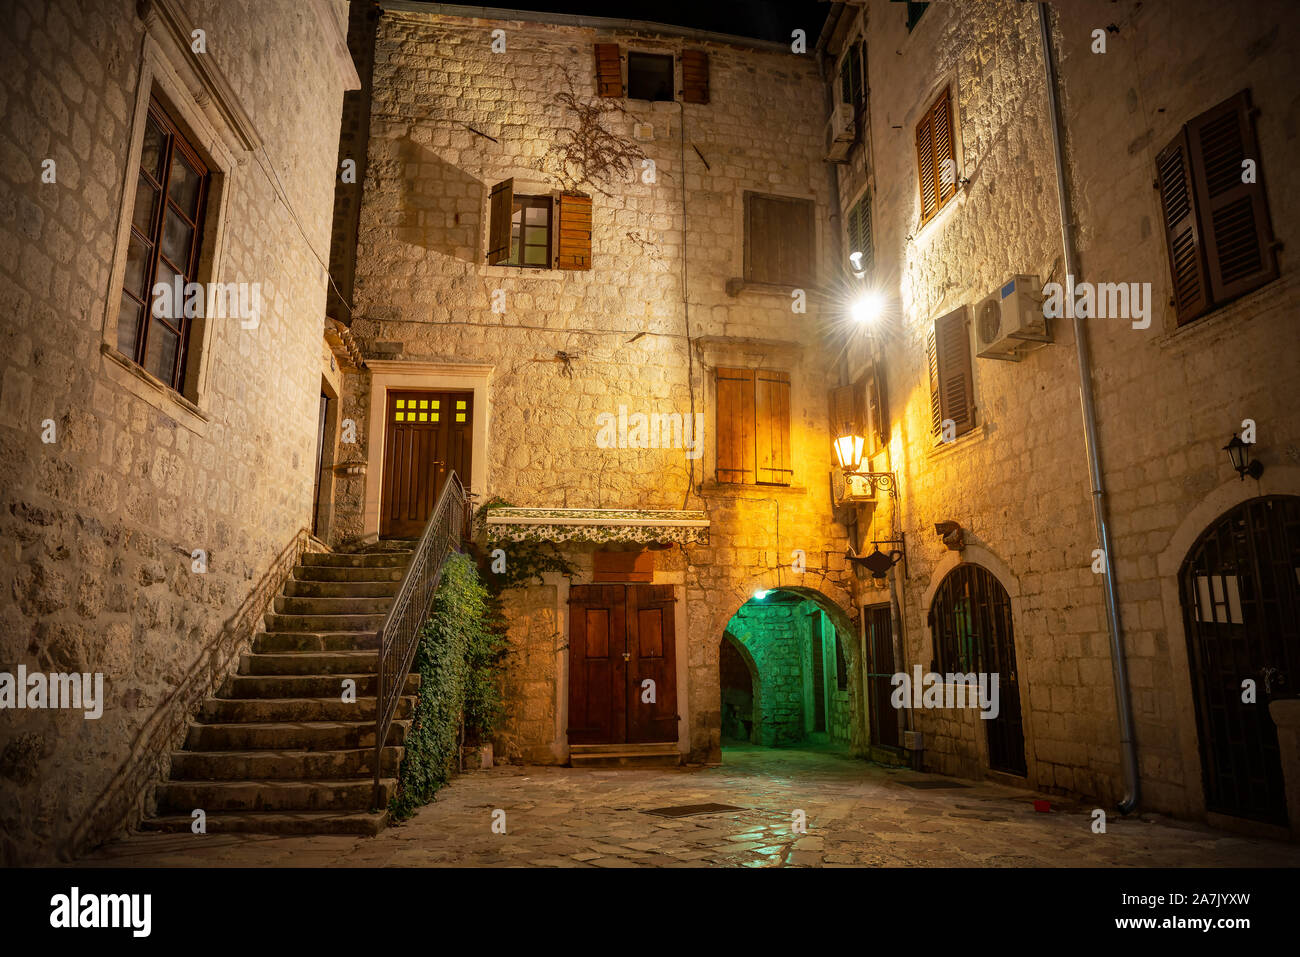 Street at night in the old town of Kotor Stock Photo